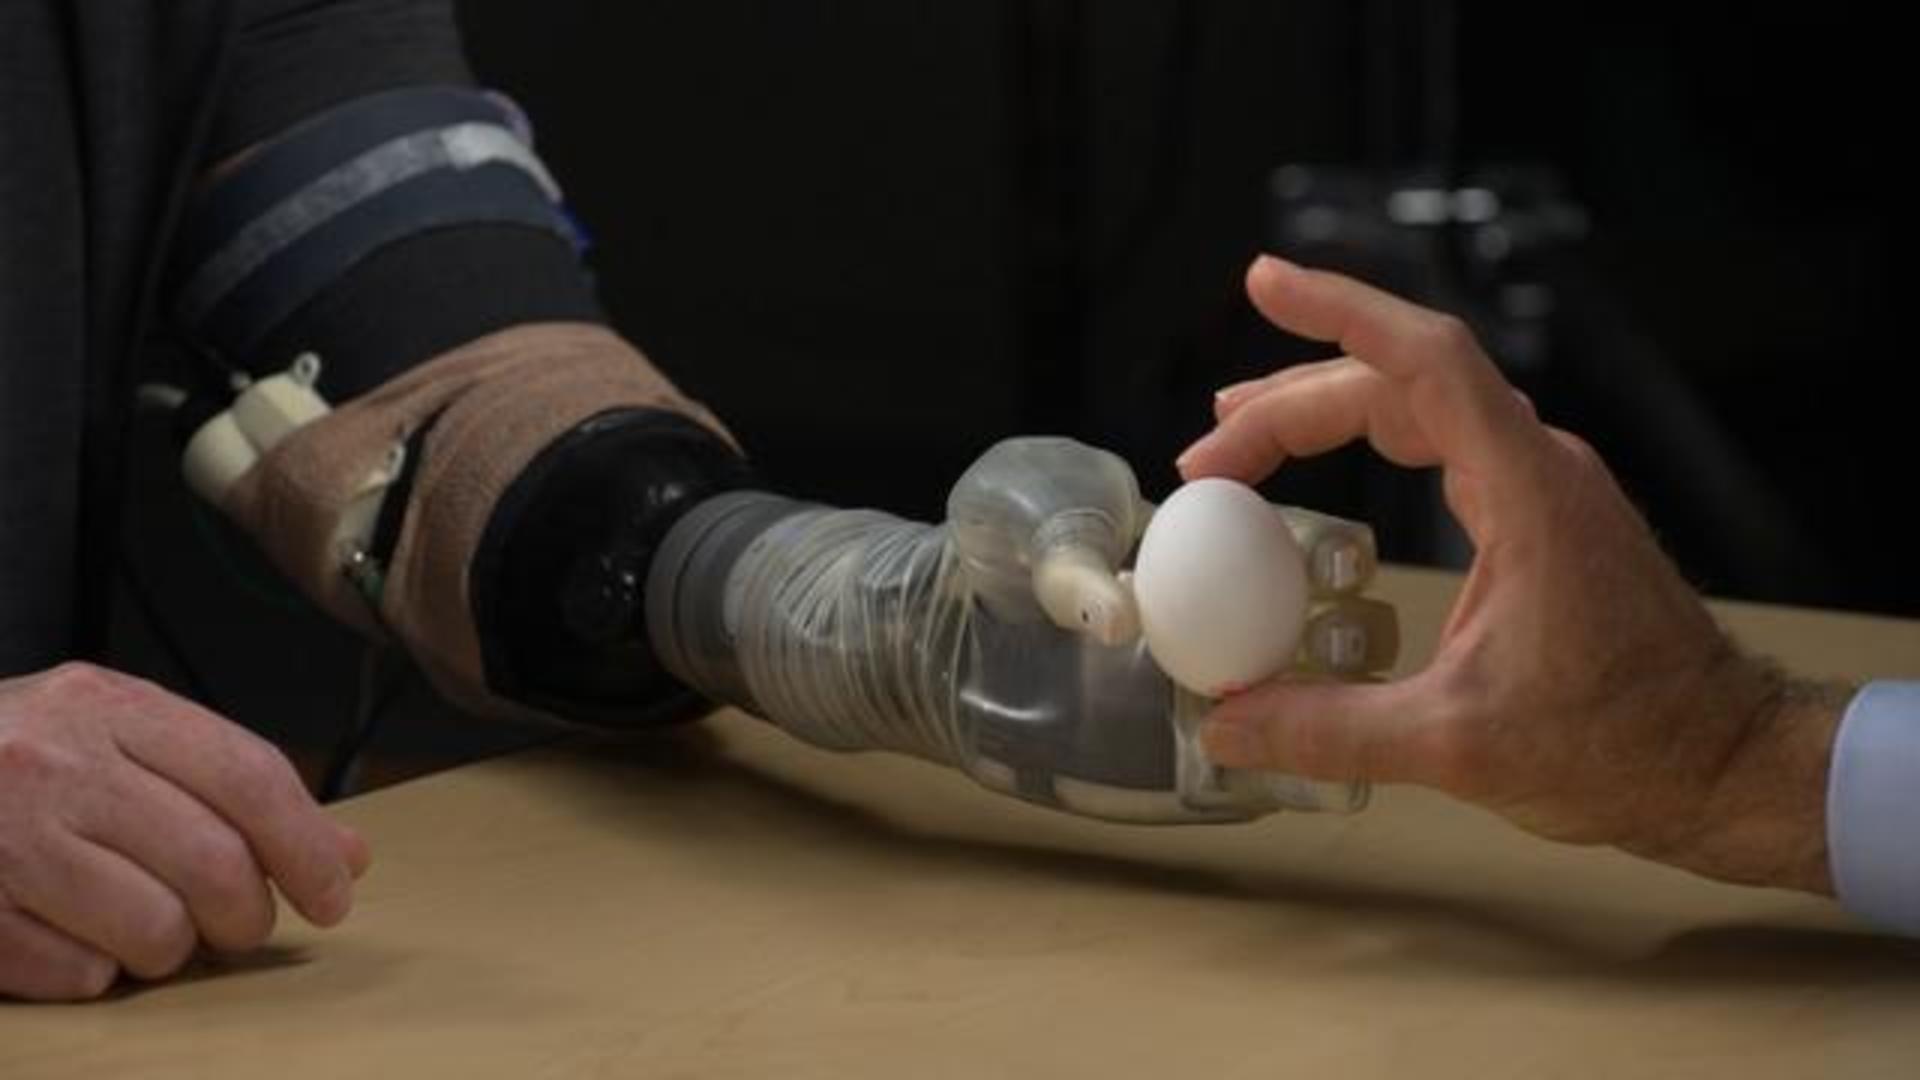 Prosthetic Limbs Get Real With Lifelike Features - ABC News